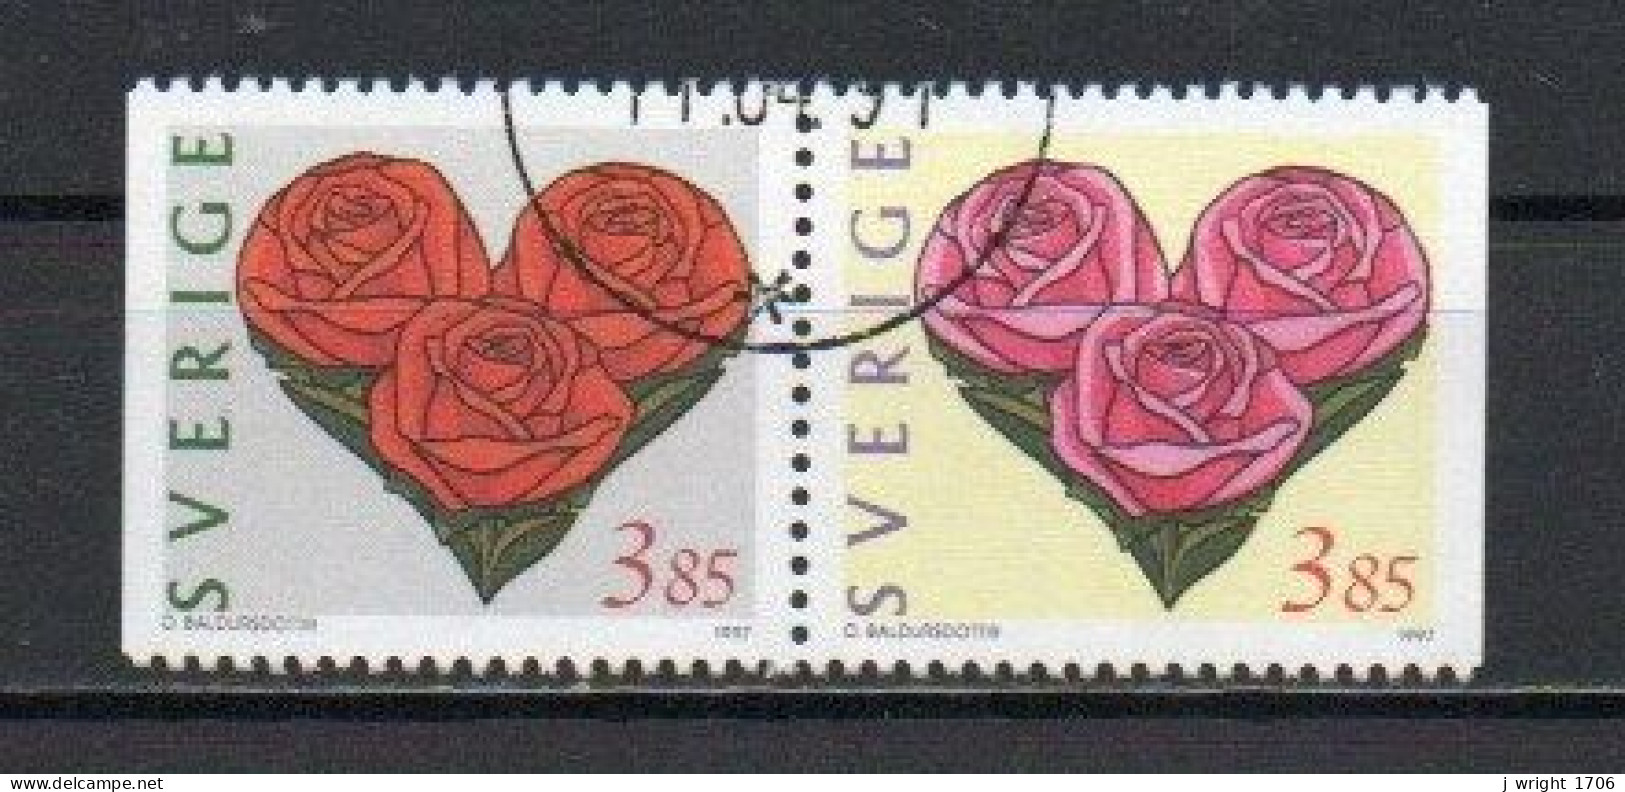 Sweden, 1997, Greetings Stamps, Set/Joined Pair, USED - Oblitérés